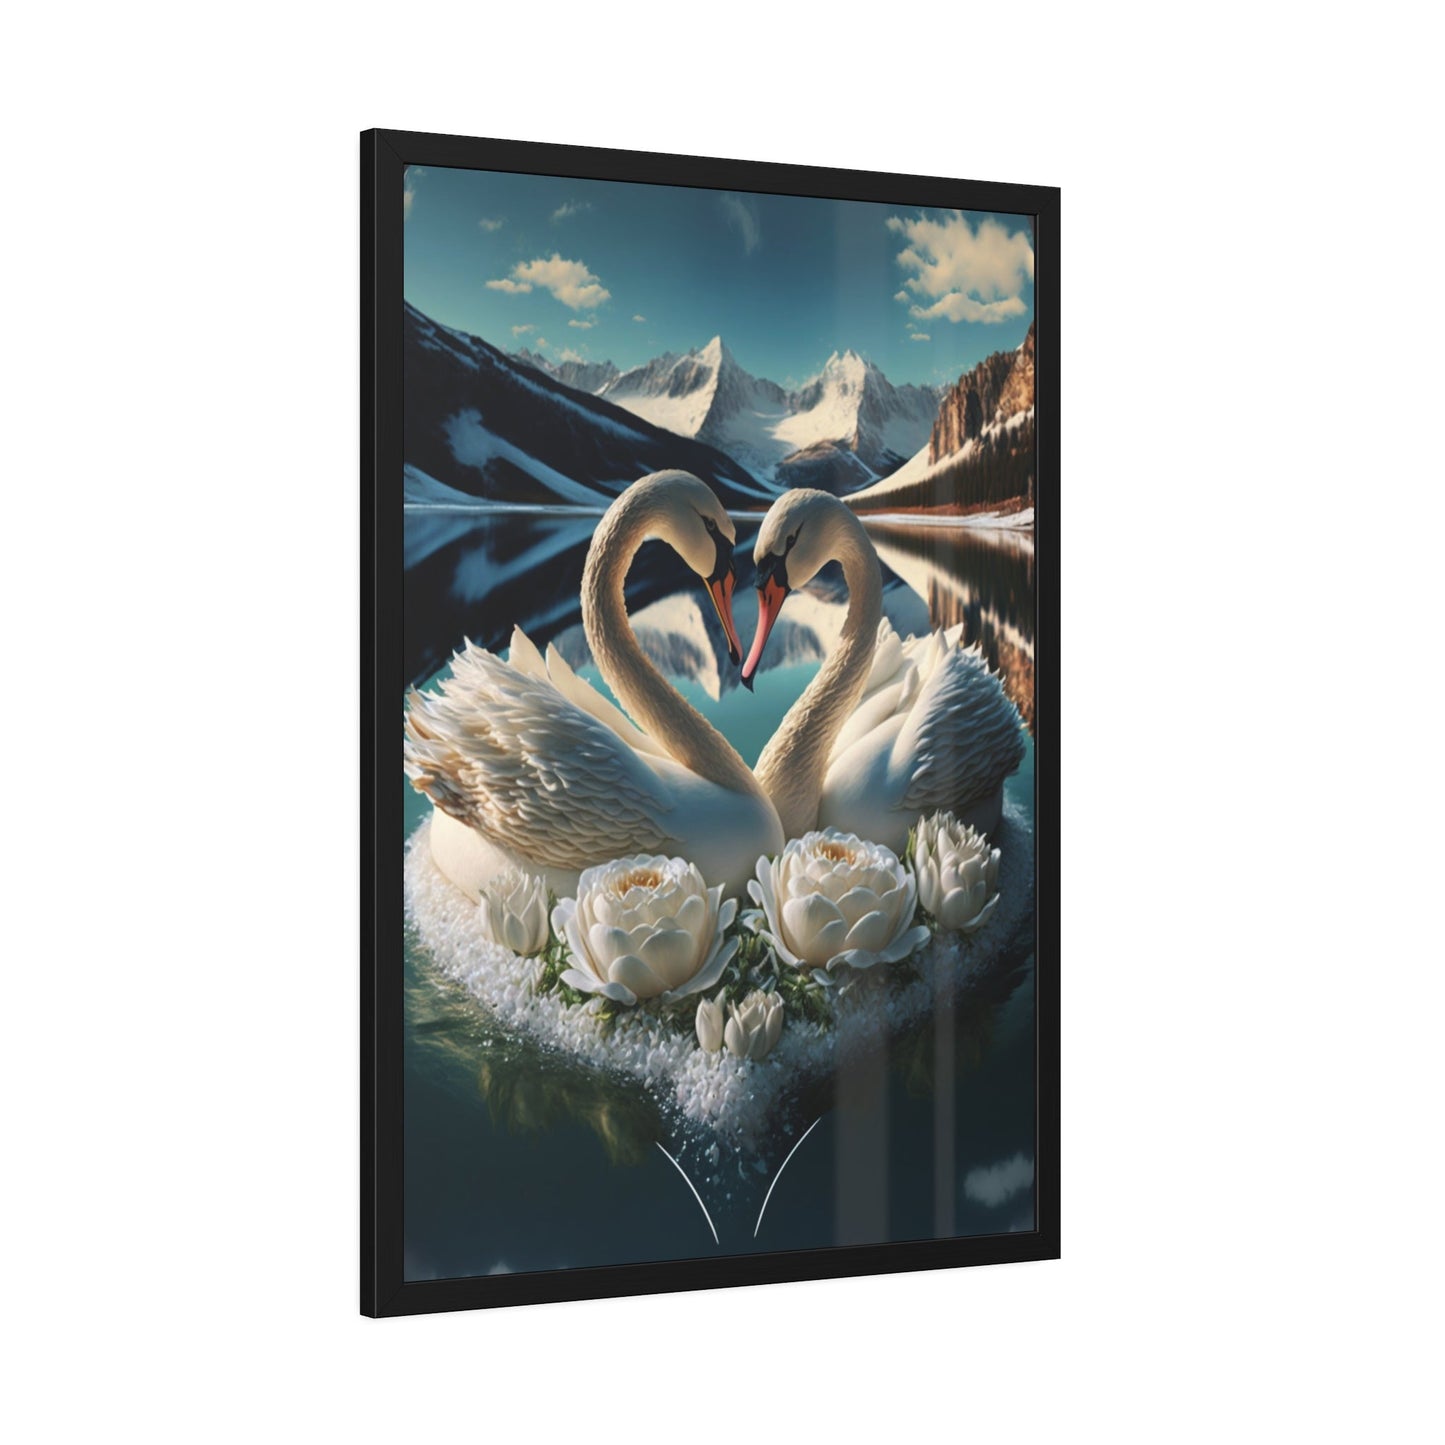 The Majesty of Swans: Framed Canvas Print of These Beautiful Birds in Their Natural Element